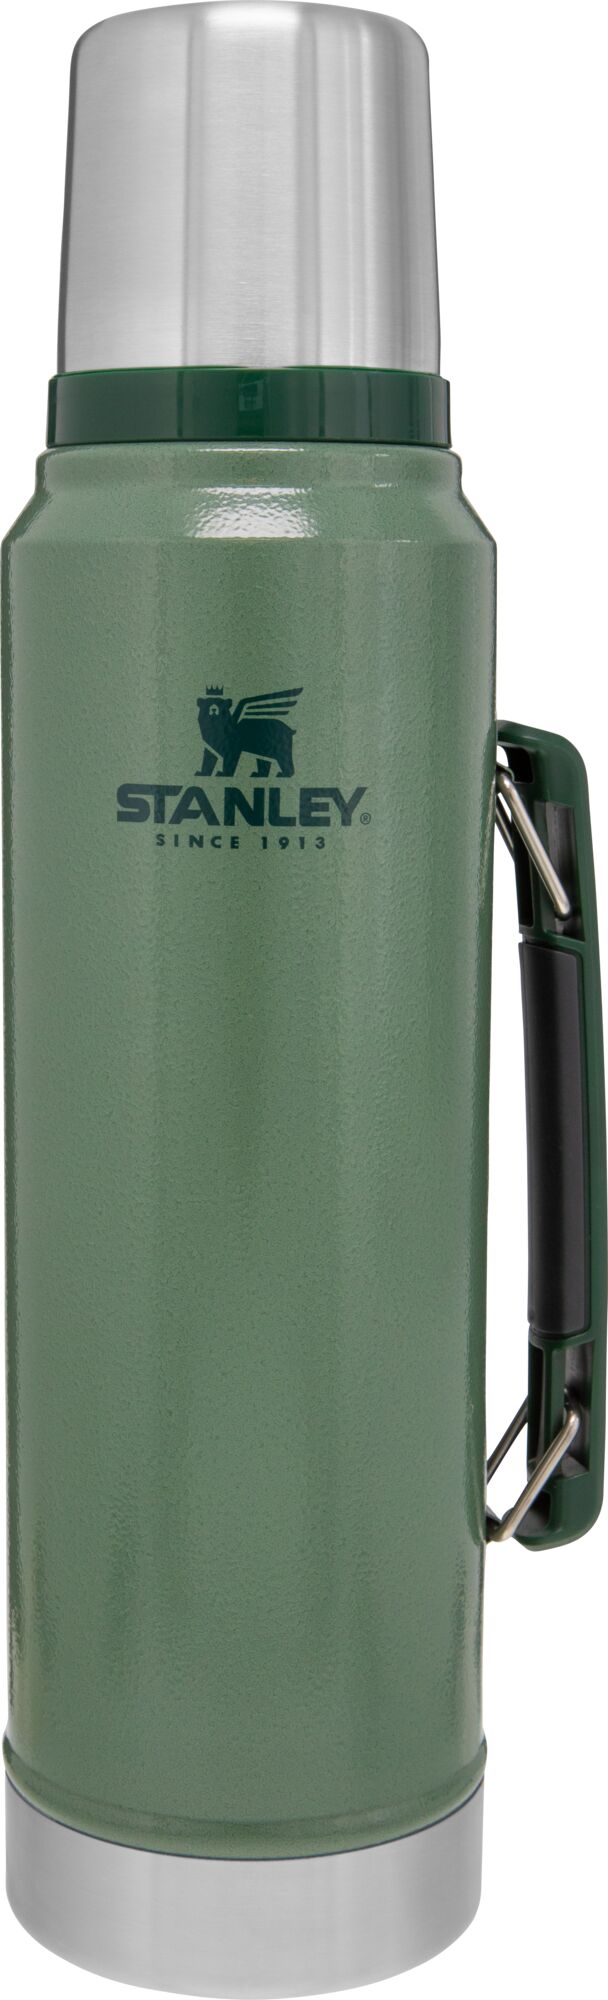 Stanley Classic Stainless Steel Vacuum Insulated Thermos Bottle, 1.1 qt - image 1 of 6